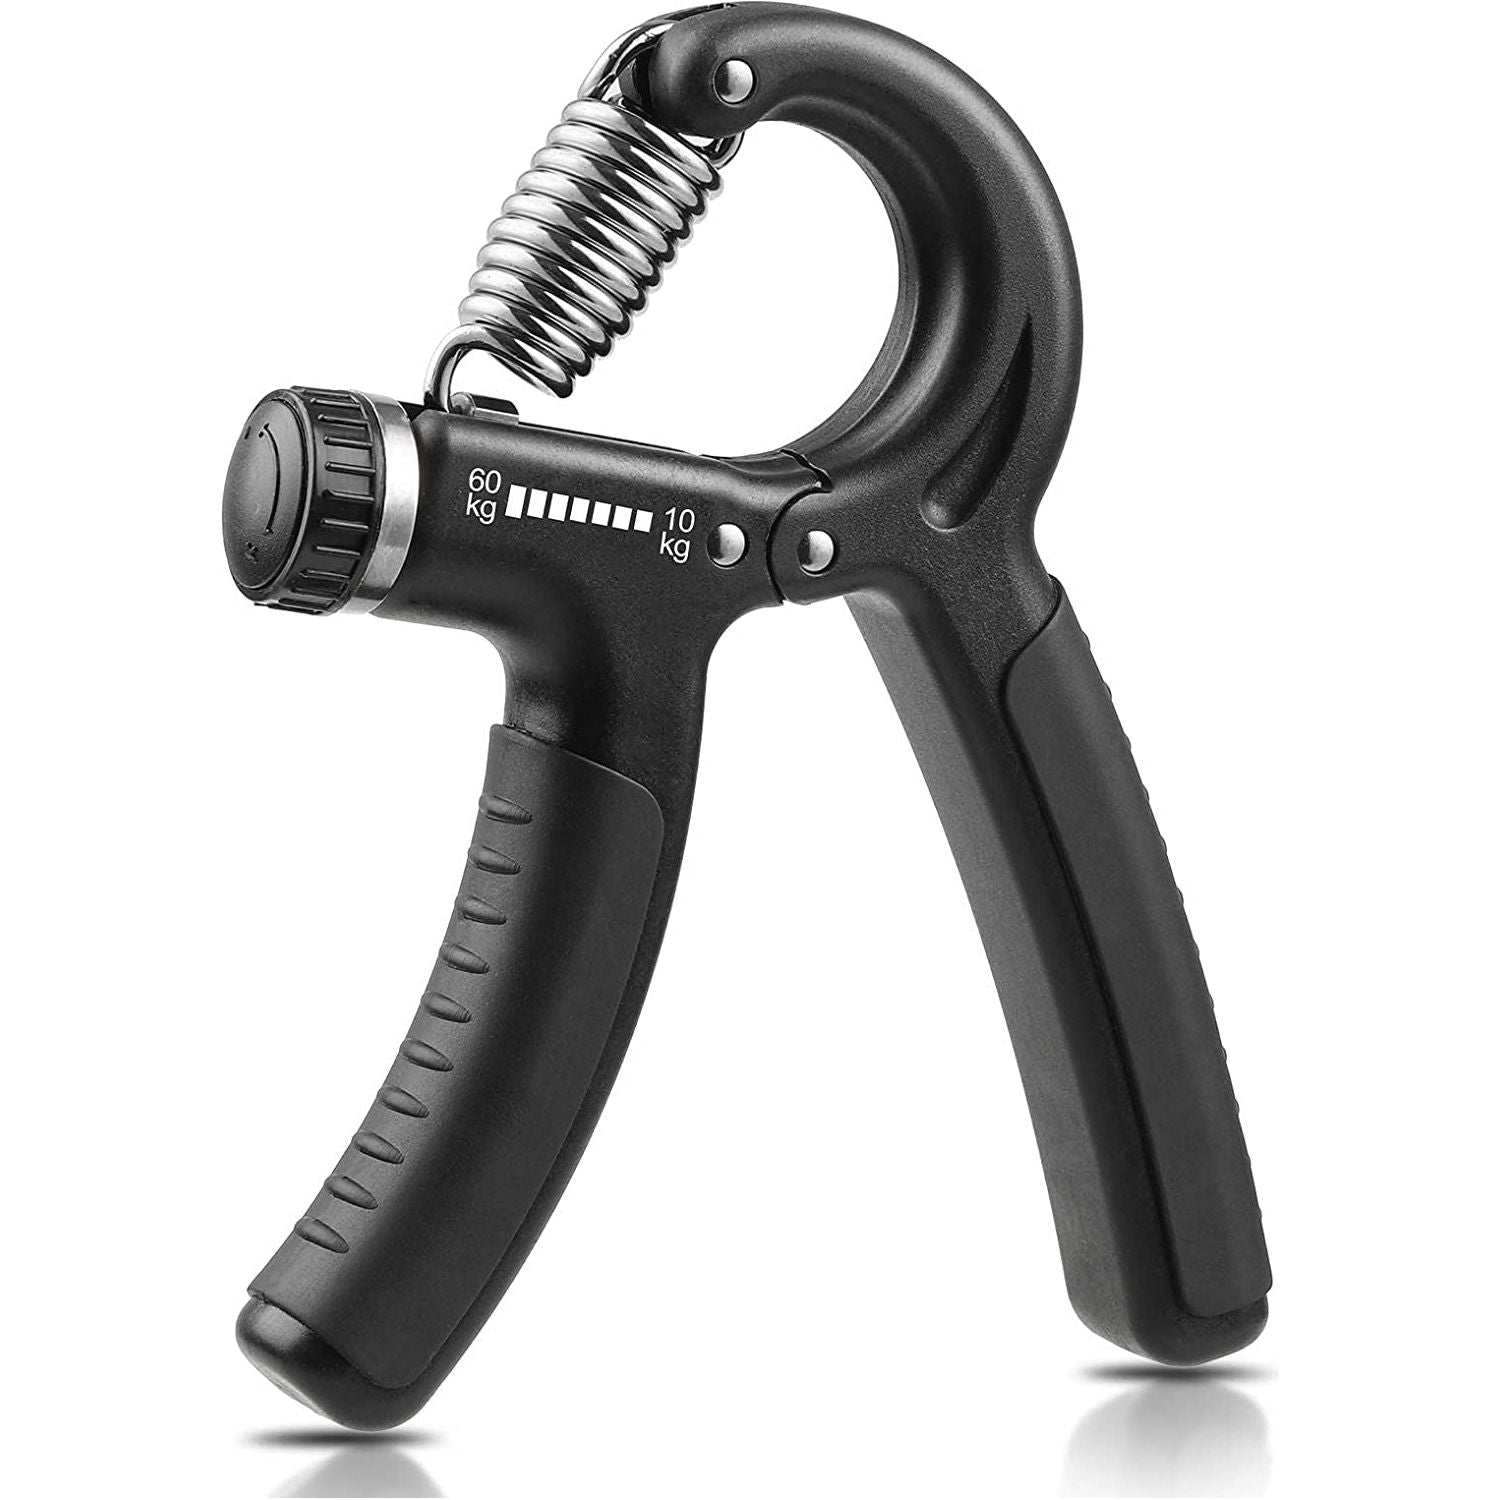 Grip Strength Trainer, Hand Grip Strengthener, Adjustable Resistance 22-132Lbs (10-60Kg), Forearm Strengthener, Perfect for Musicians Athletes and Hand Injury Recovery